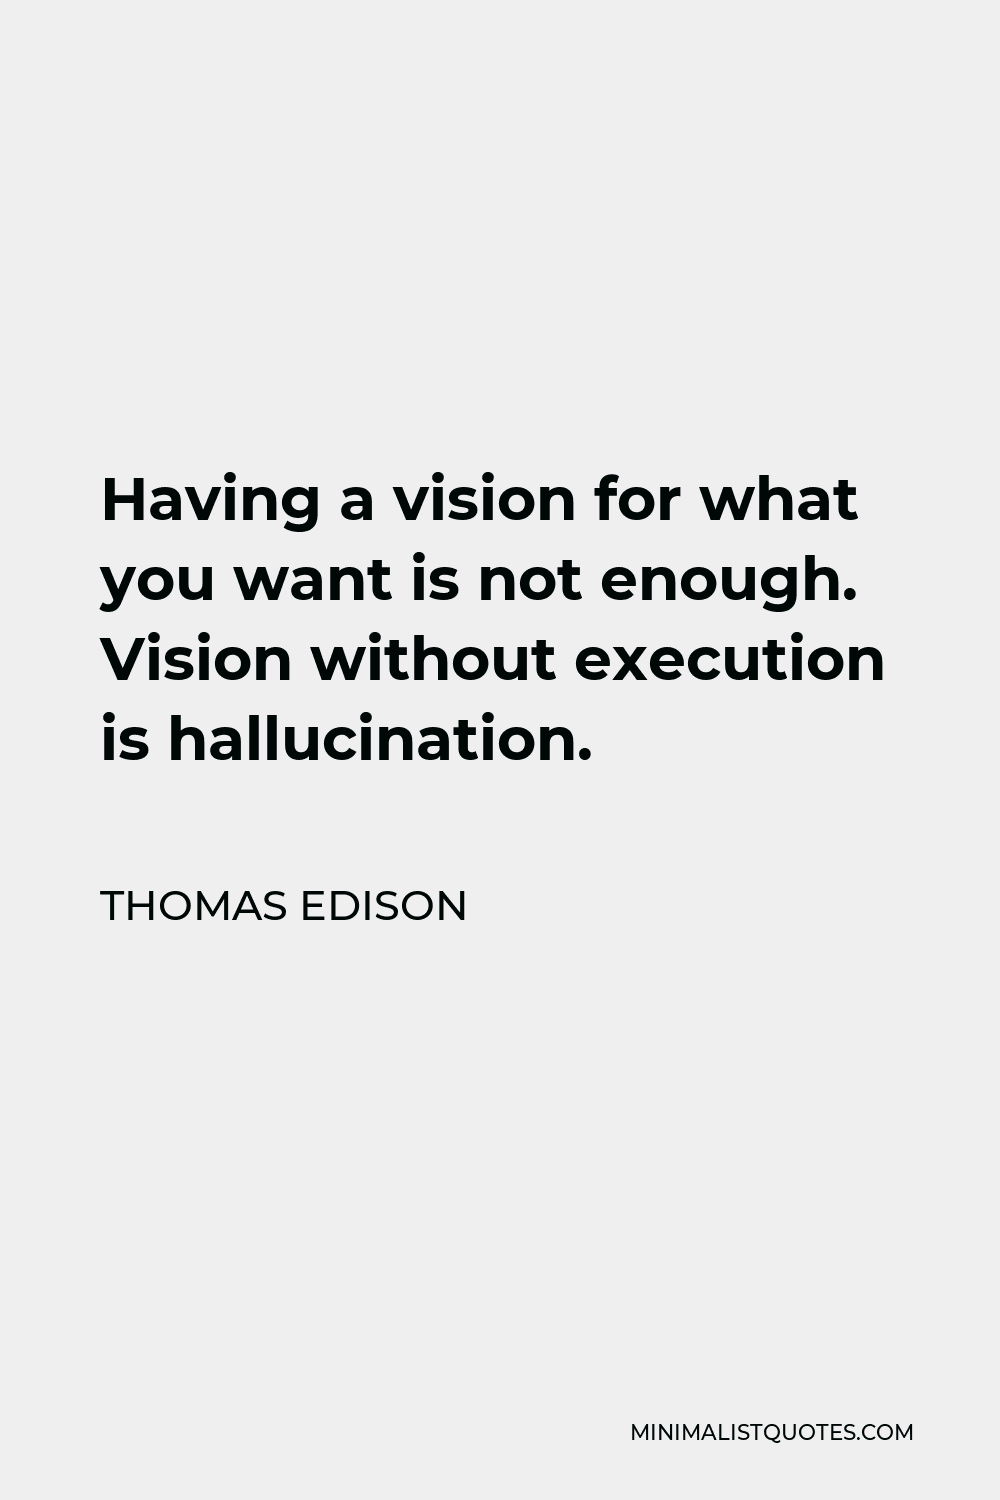 Thomas Edison Quote - Having a vision for what you want is not enough. Vision without execution is hallucination.